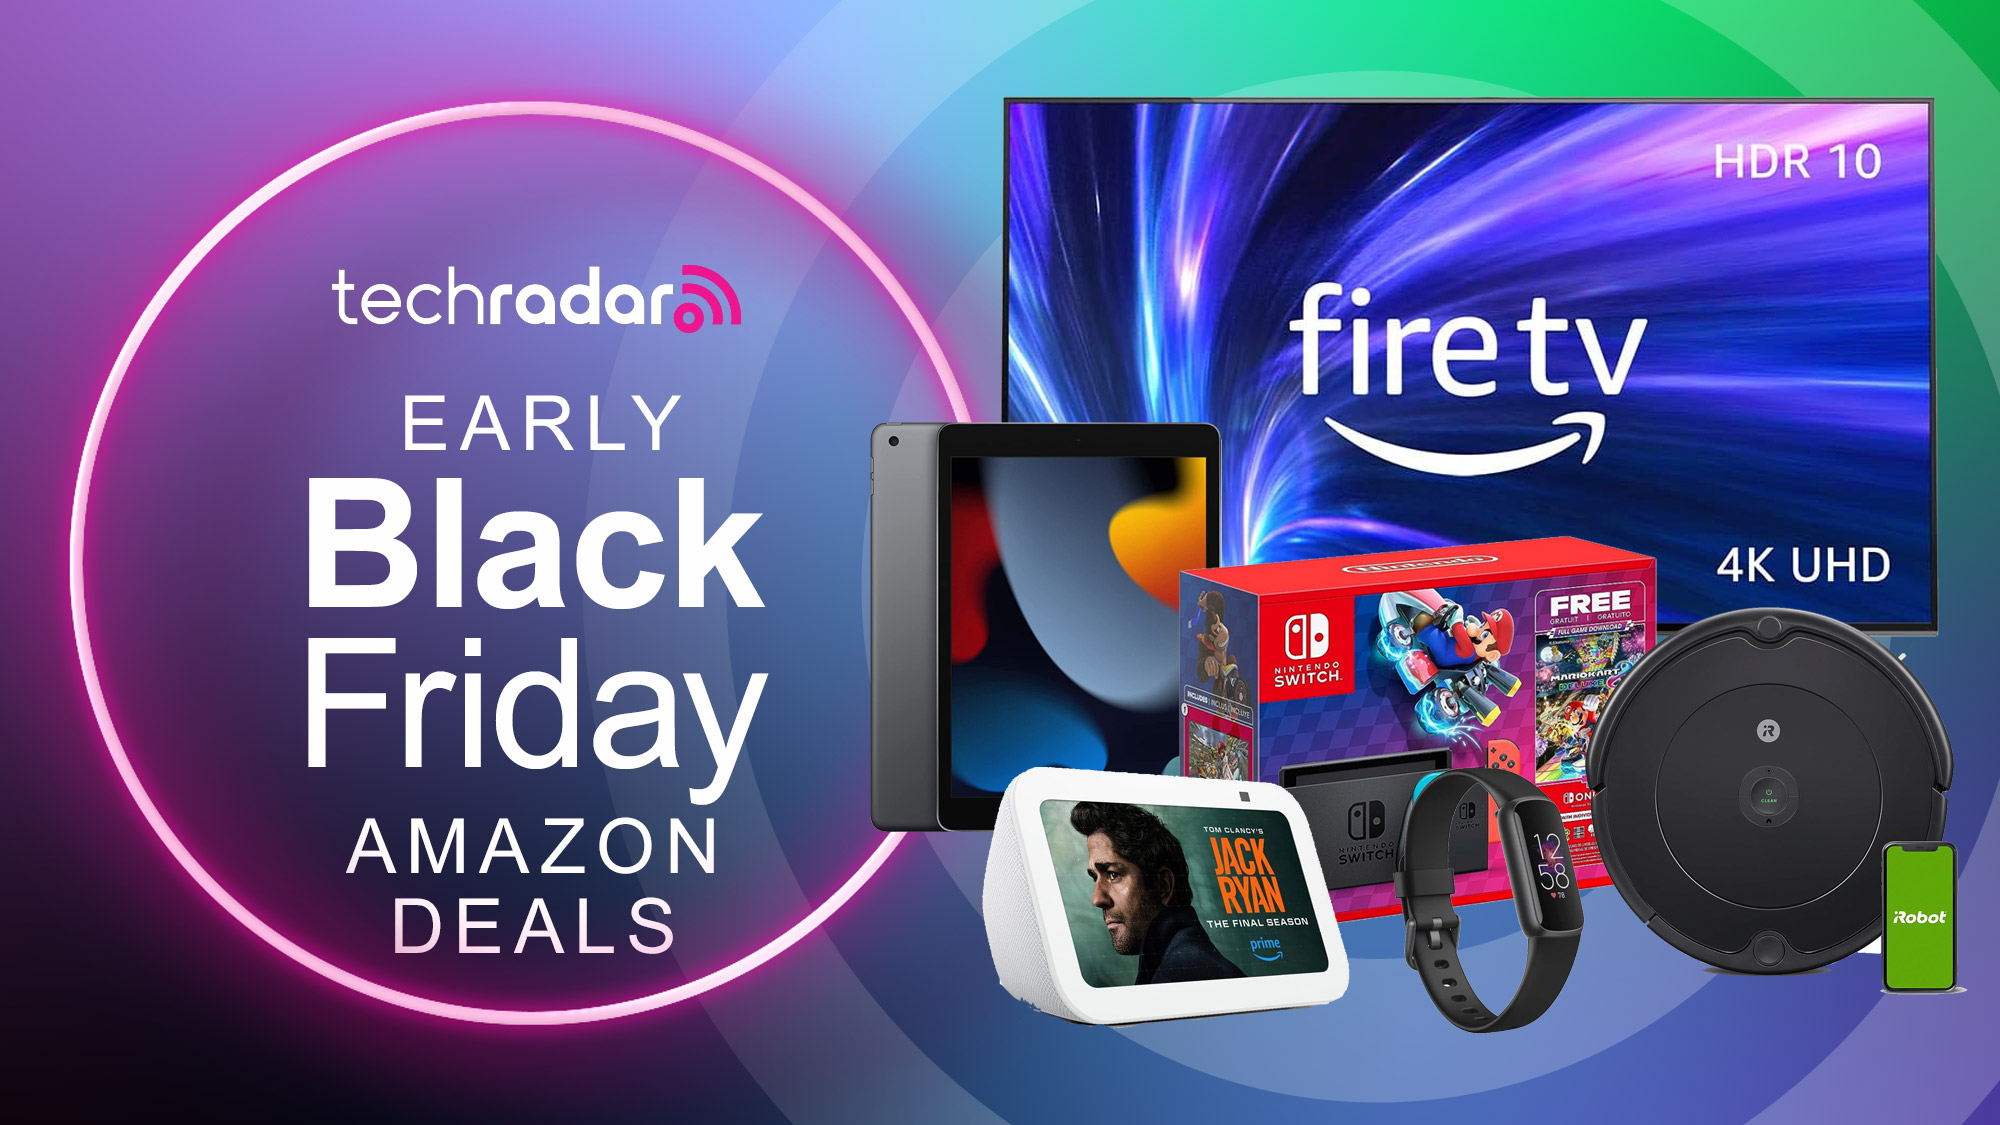 Amazon Fire TV, iPad, Nintendo Swich, Echo Show, Fitbit Luxe and Roomba next to the TechRadar early Black Friday deals logo